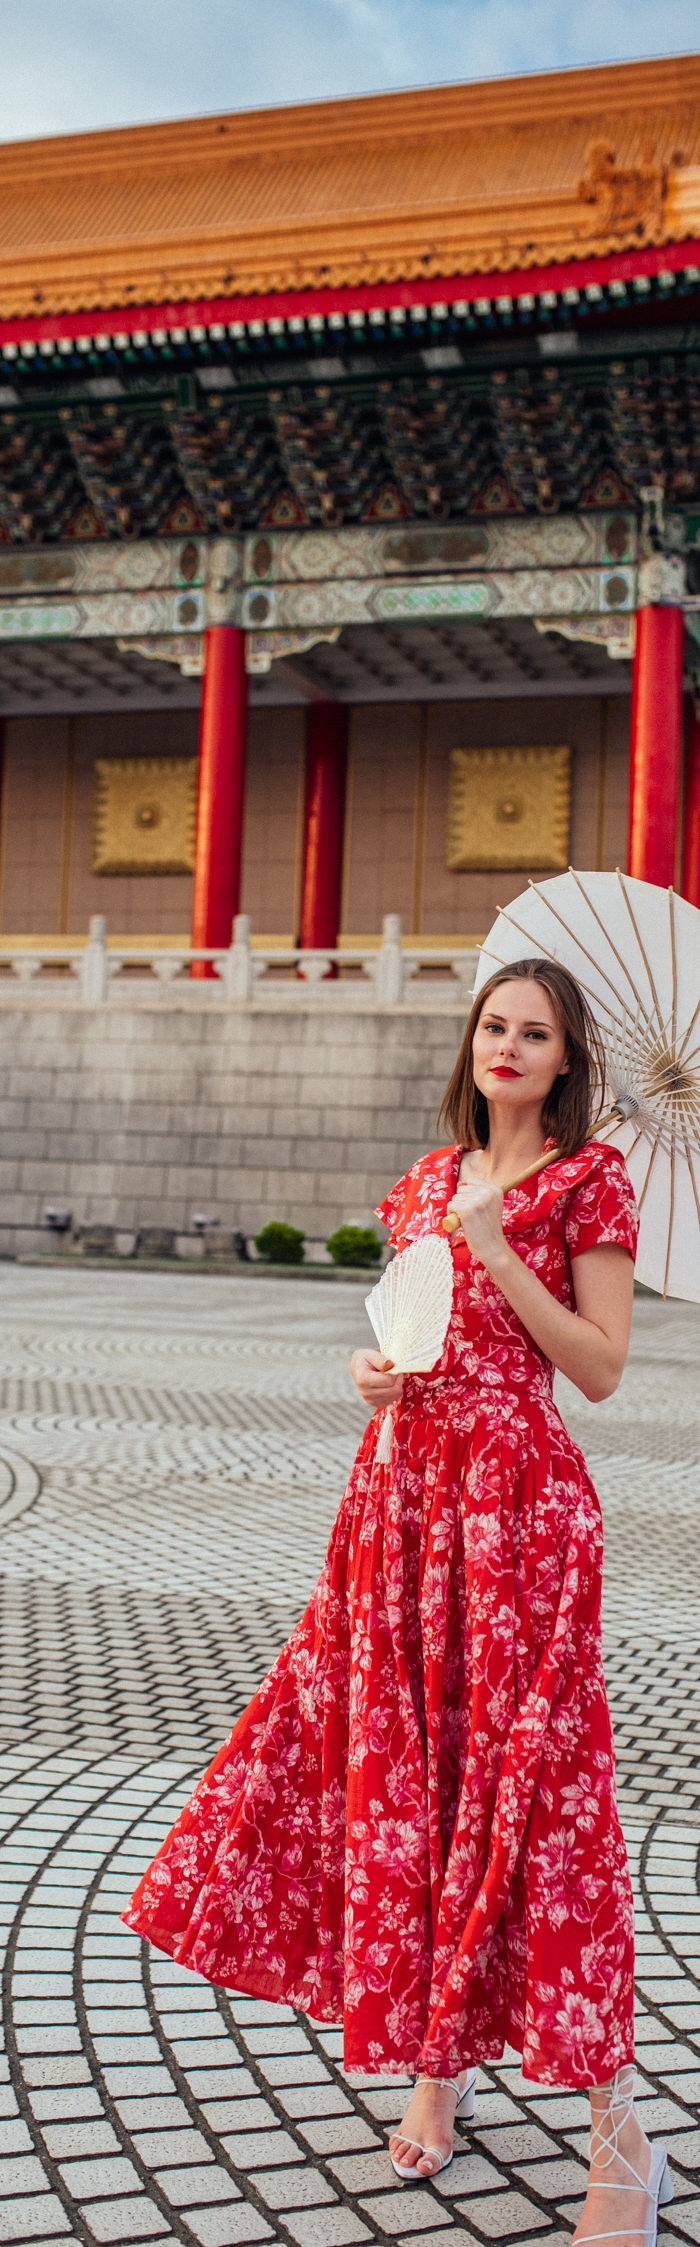 Alyssa Campanella of The A List blog visits Taipei for 24 hours wearing Gul Hurgel